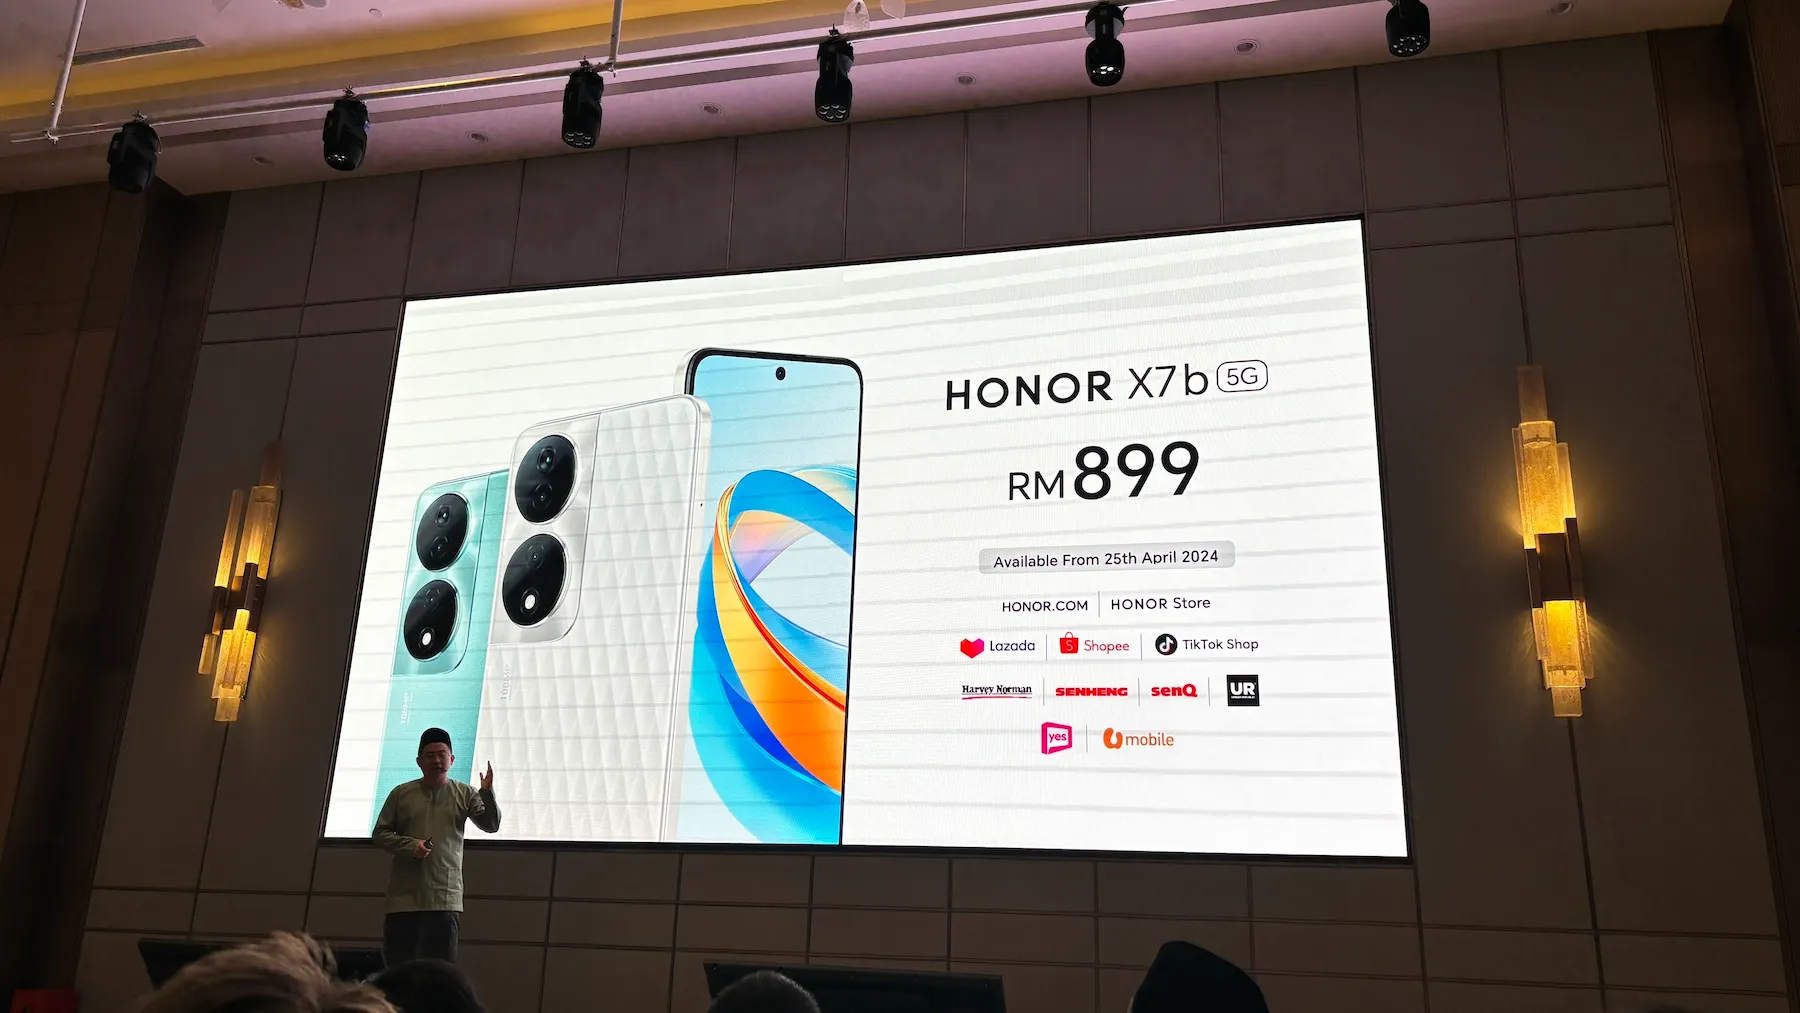 Entry level 5G smartphone below RM900